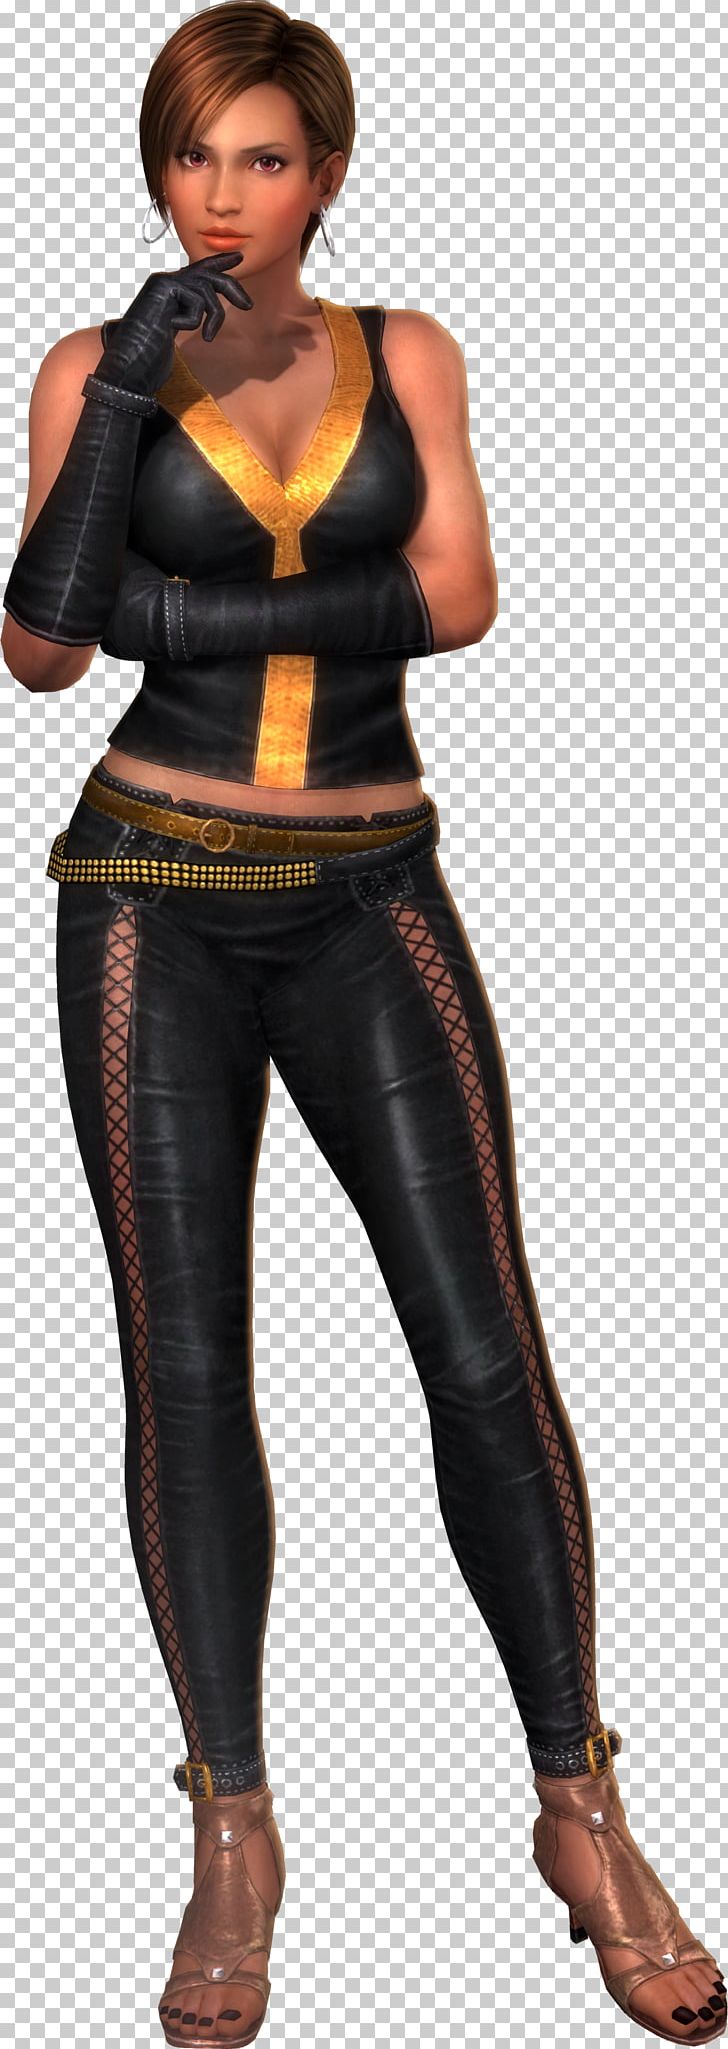 Lisa Hamilton Dead Or Alive 5 Last Round Dead Or Alive 4 Dead Or Alive Xtreme Beach Volleyball PNG, Clipart, Abdomen, Costume, Dead Or Alive, Dead Or Alive 2, Dead Or Alive 3 Free PNG Download